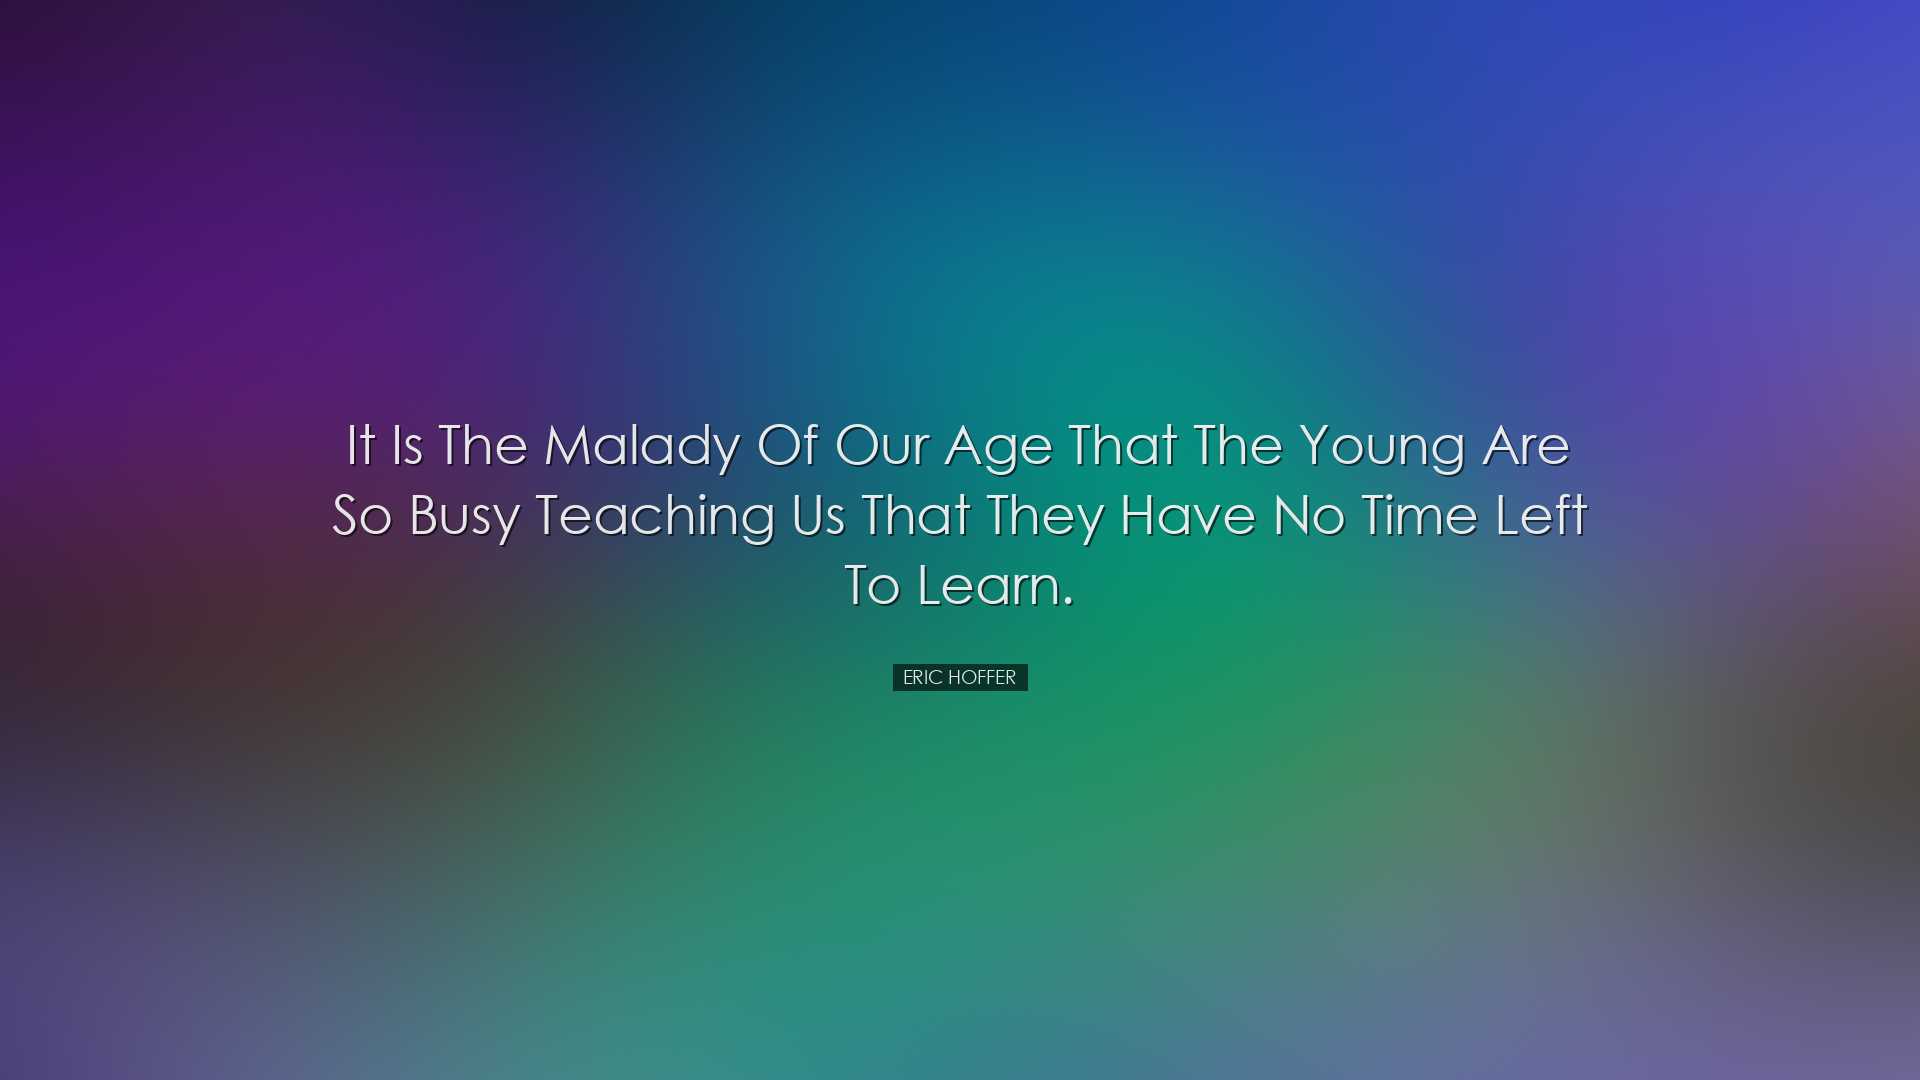 It is the malady of our age that the young are so busy teaching us